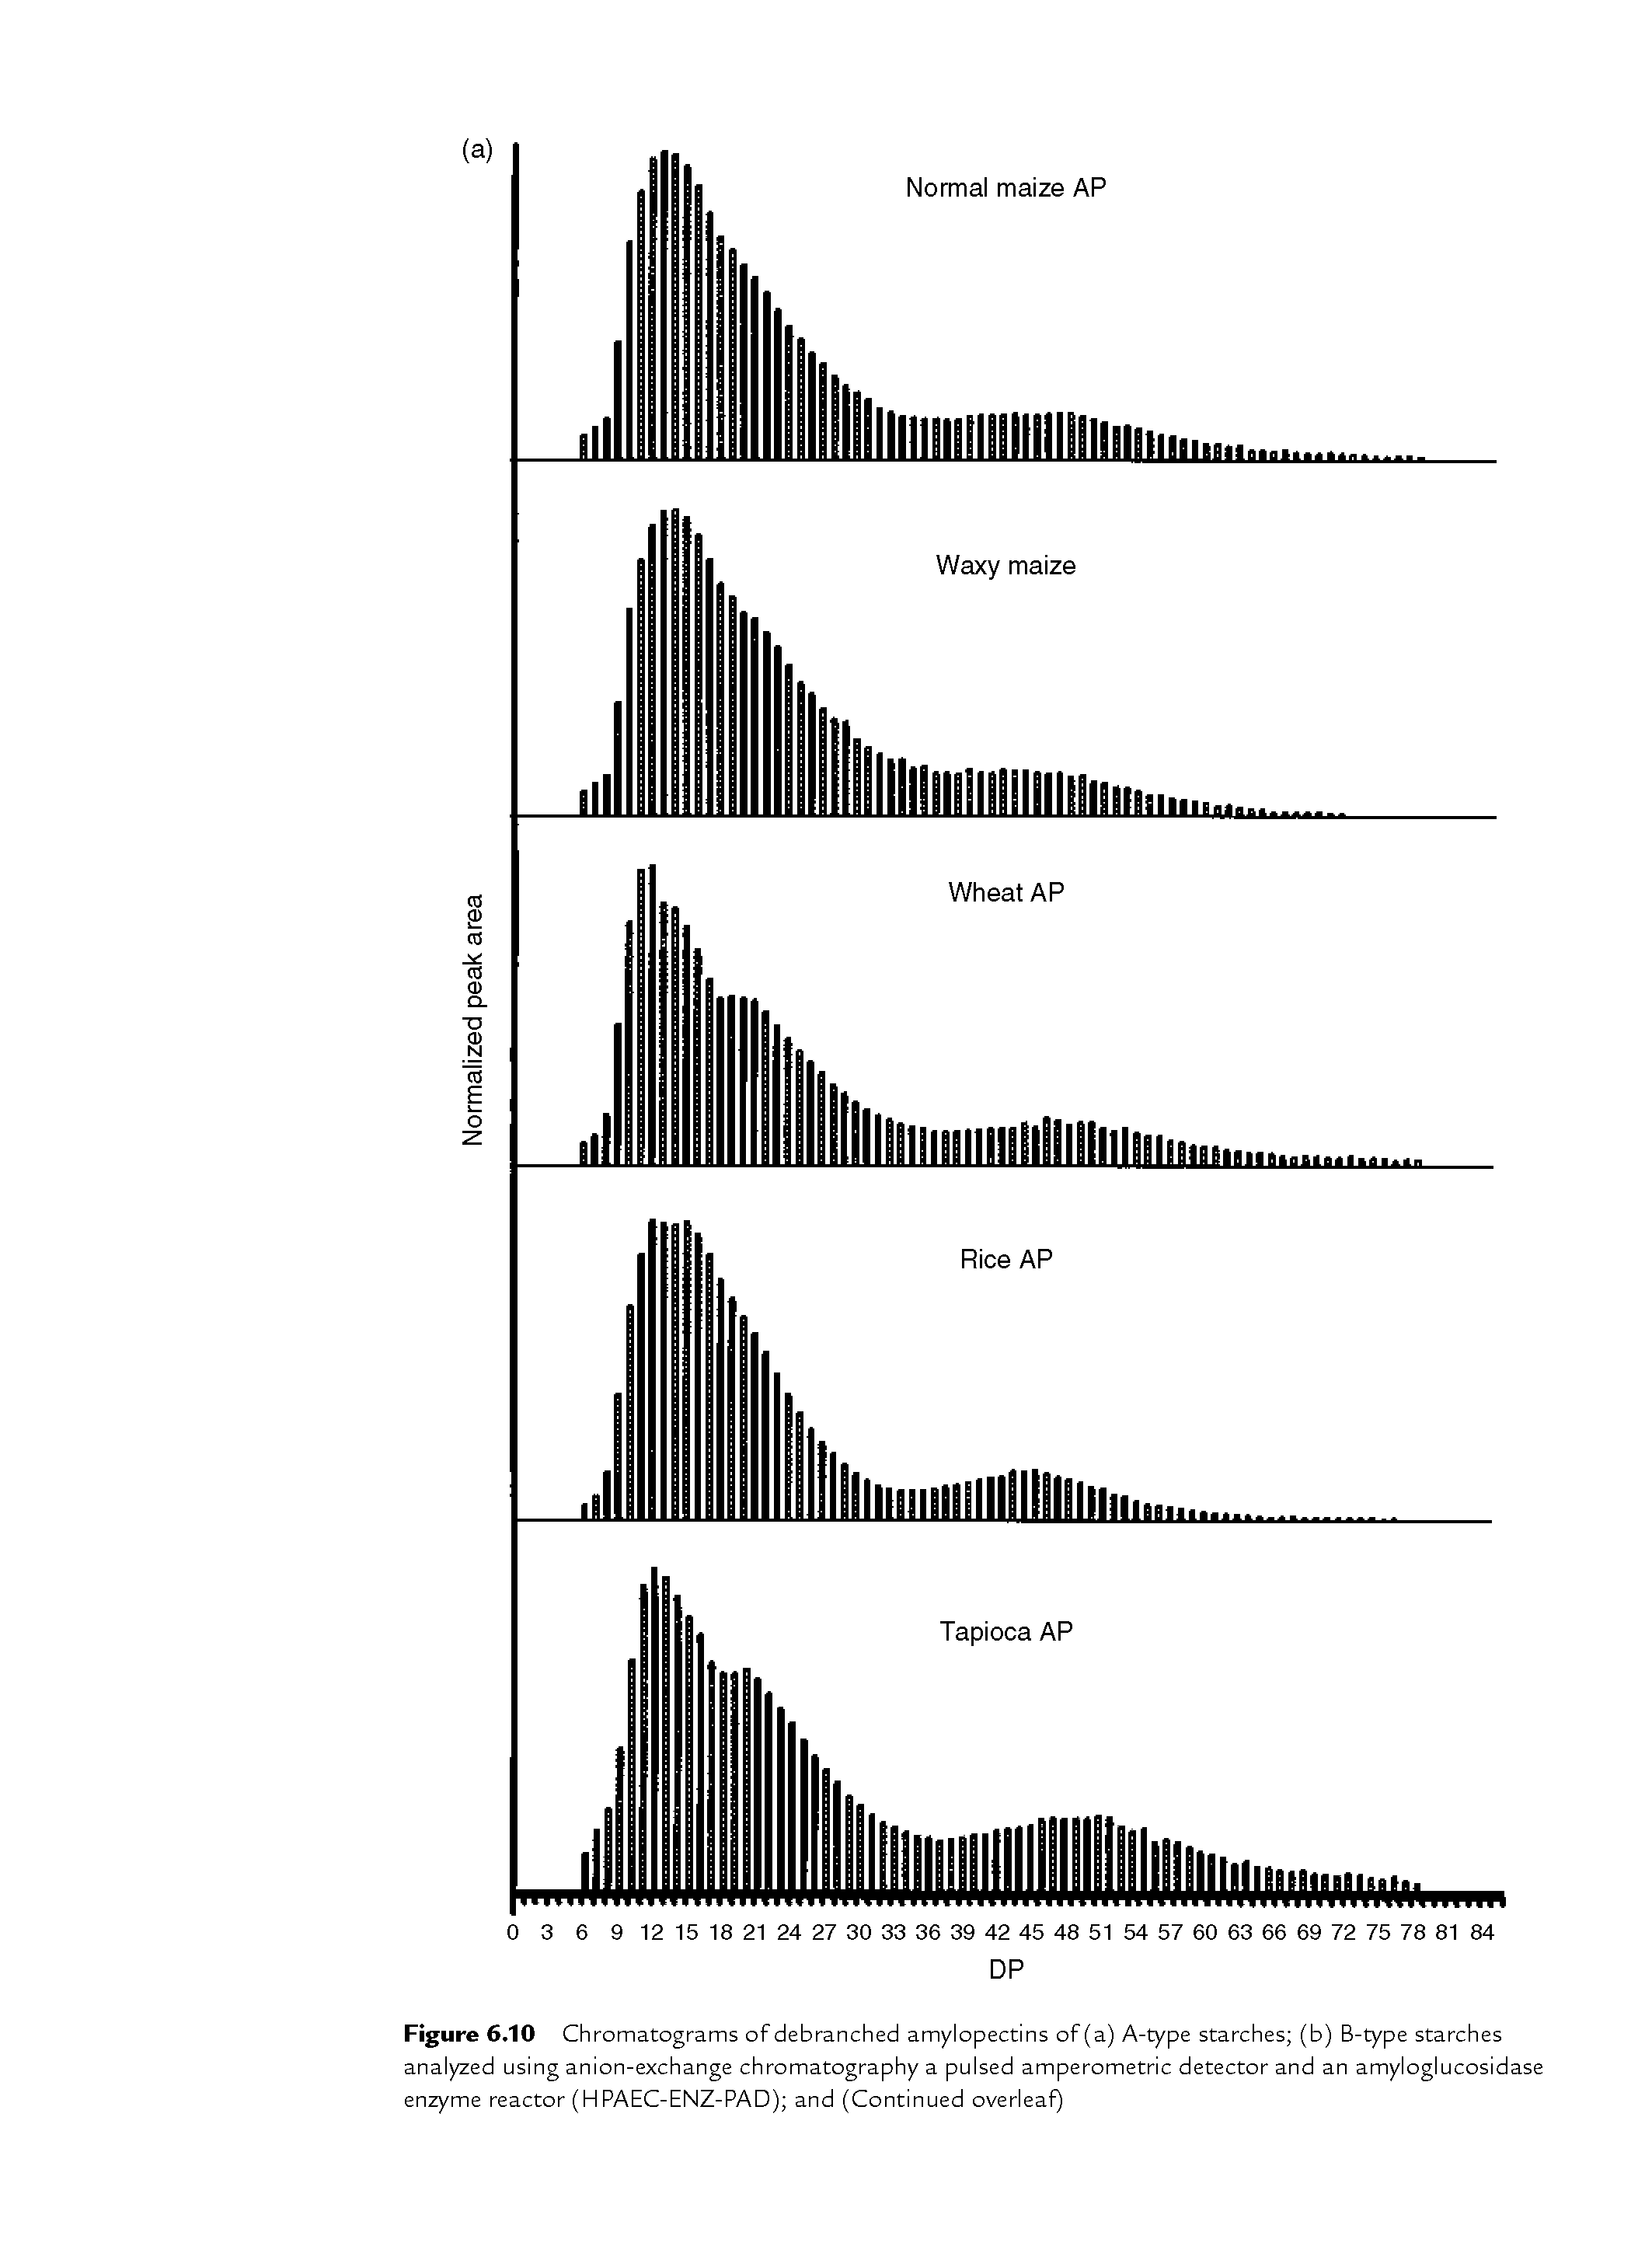 Figure 6.10 Chromatograms of debranched amylopectins of (a) A-type starches (b) B-type starches analyzed using anion-exchange chromatography a pulsed amperometric detector and an amyloglucosidase enzyme reactor (HPAEC-ENZ-PAD) and (Continued overleaf)...